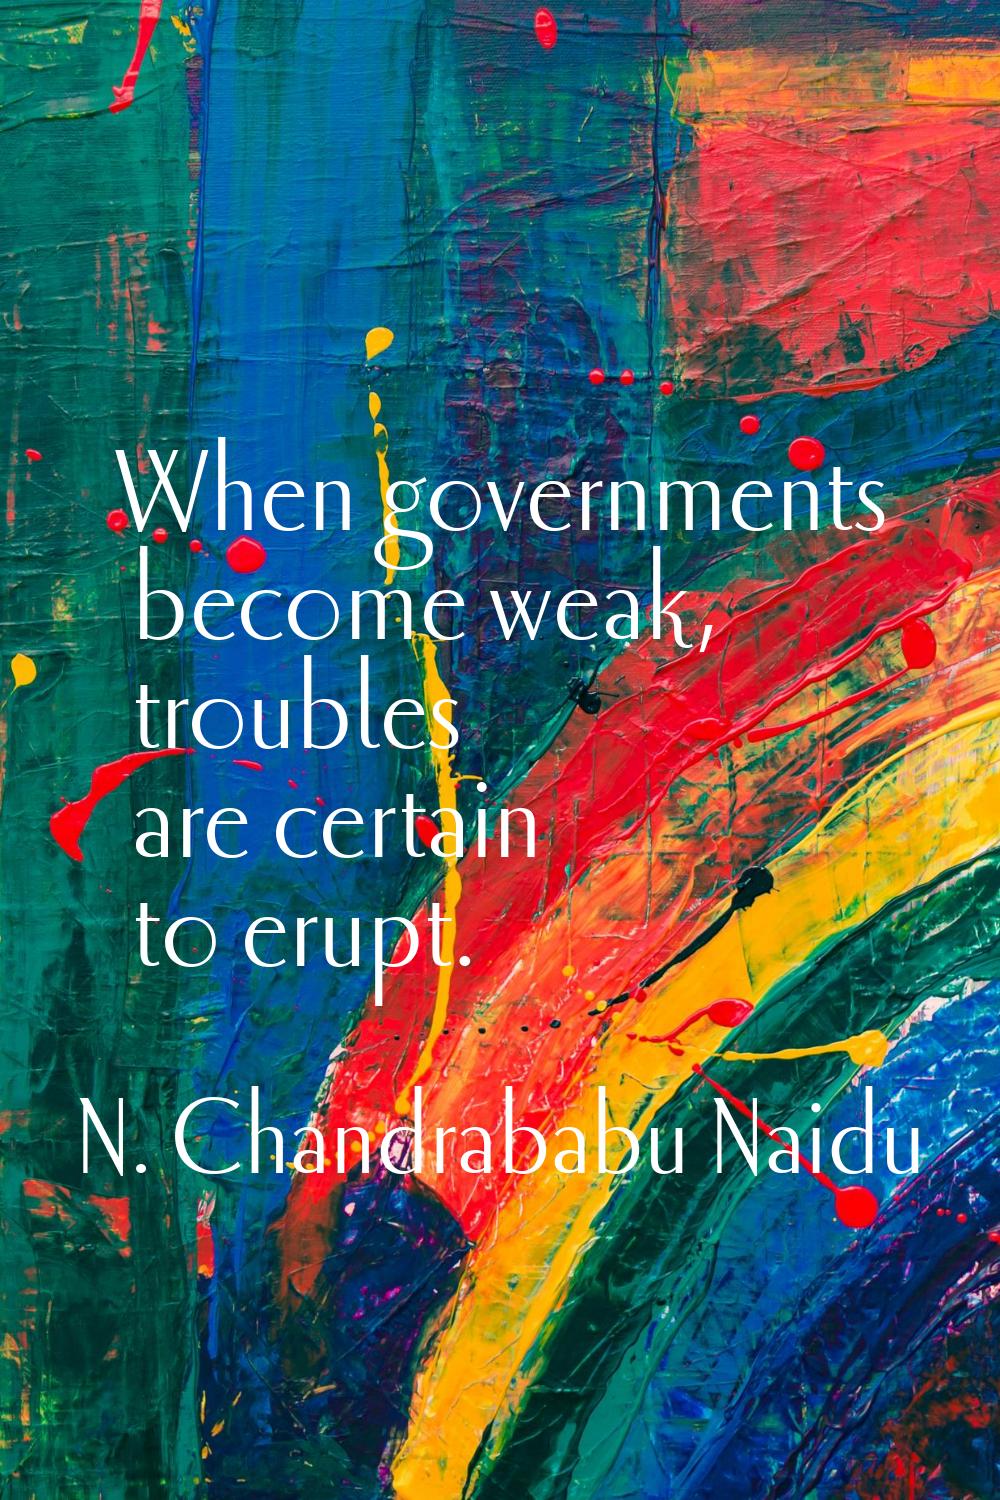 When governments become weak, troubles are certain to erupt.